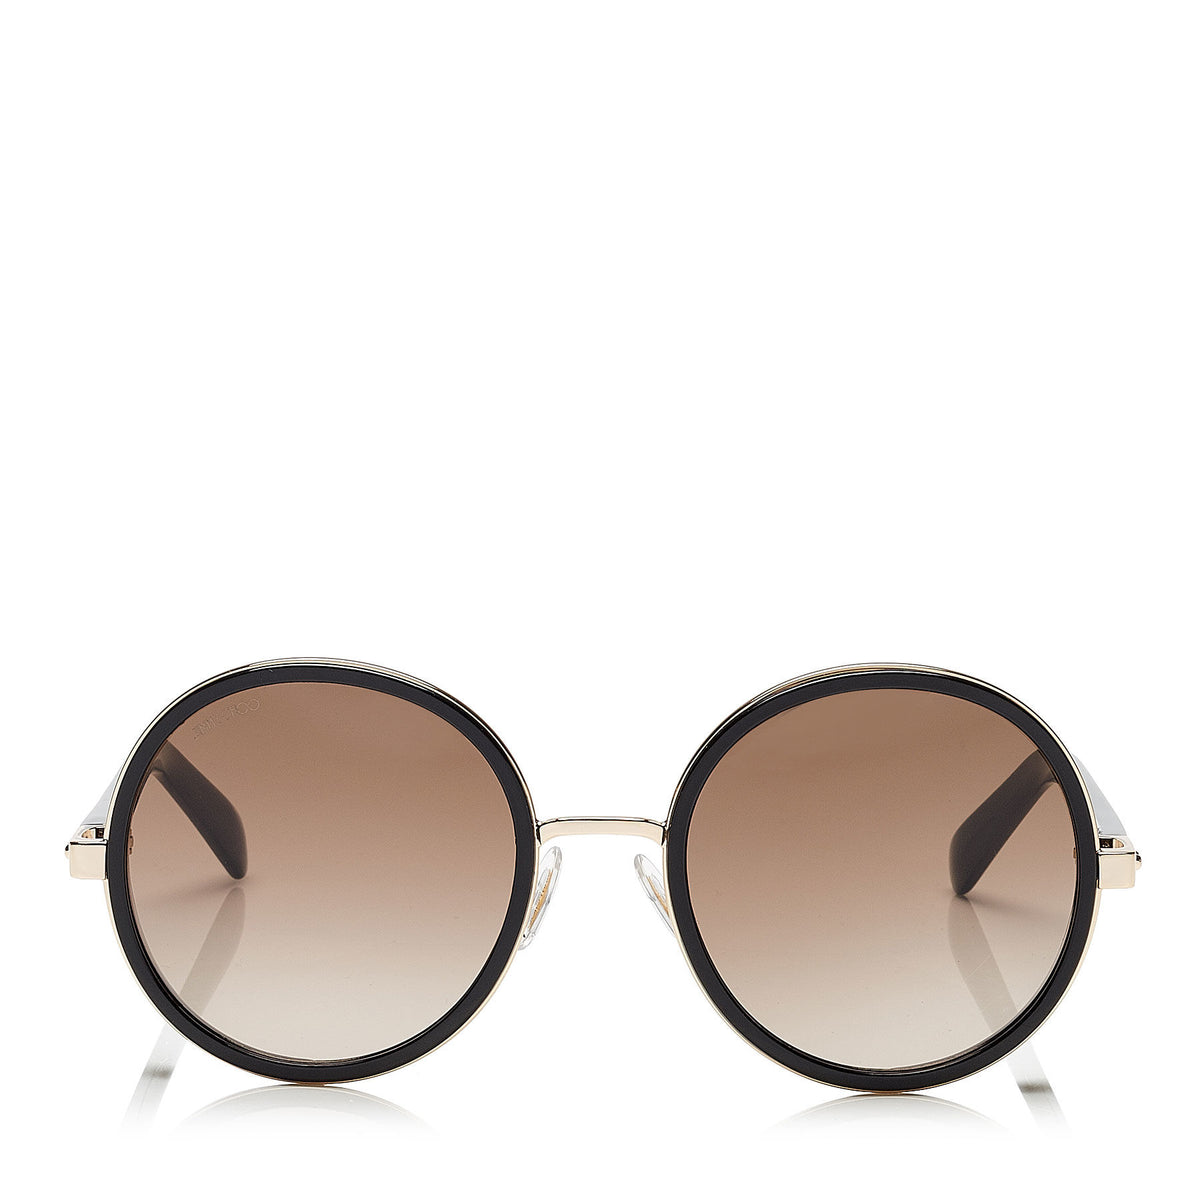 JIMMY CHOO Andie Rose Gold and Black Acetate Round Framed Sunglasses with Gold and Silver Fabric Detailing ITEM NO. ANDIES54EJ7Q